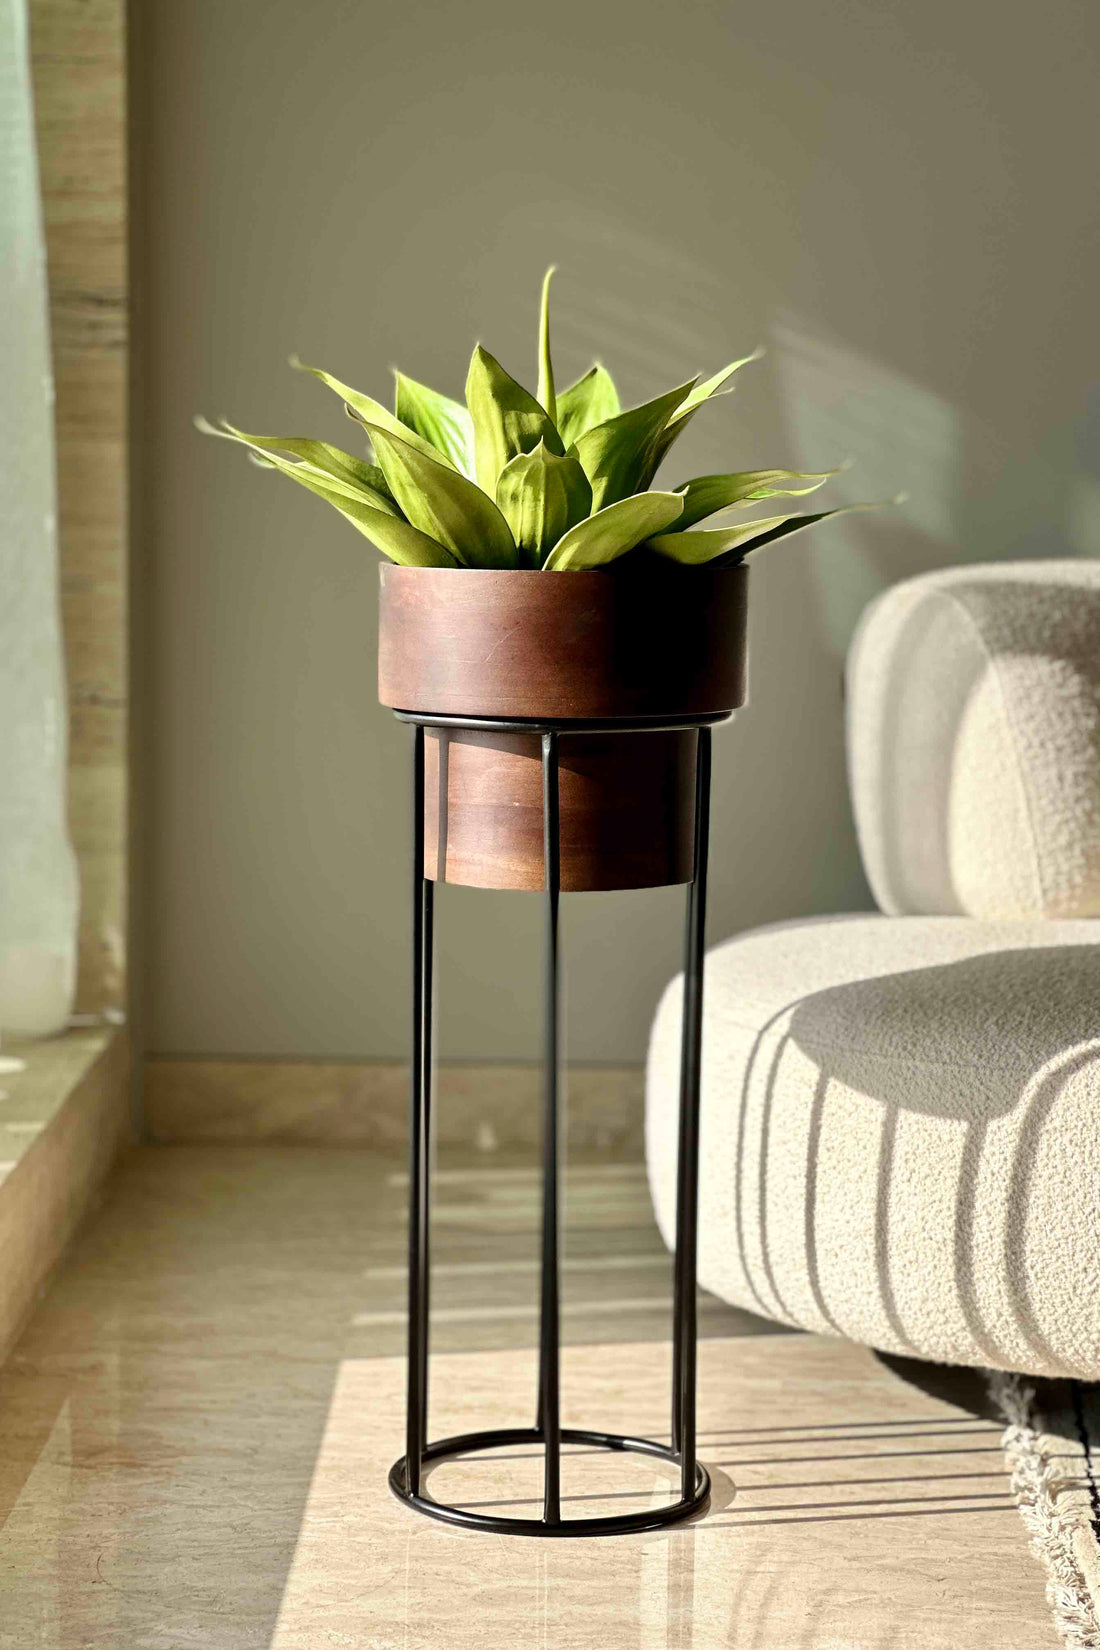 Vienna Wooden Planter With Black Stand - Large